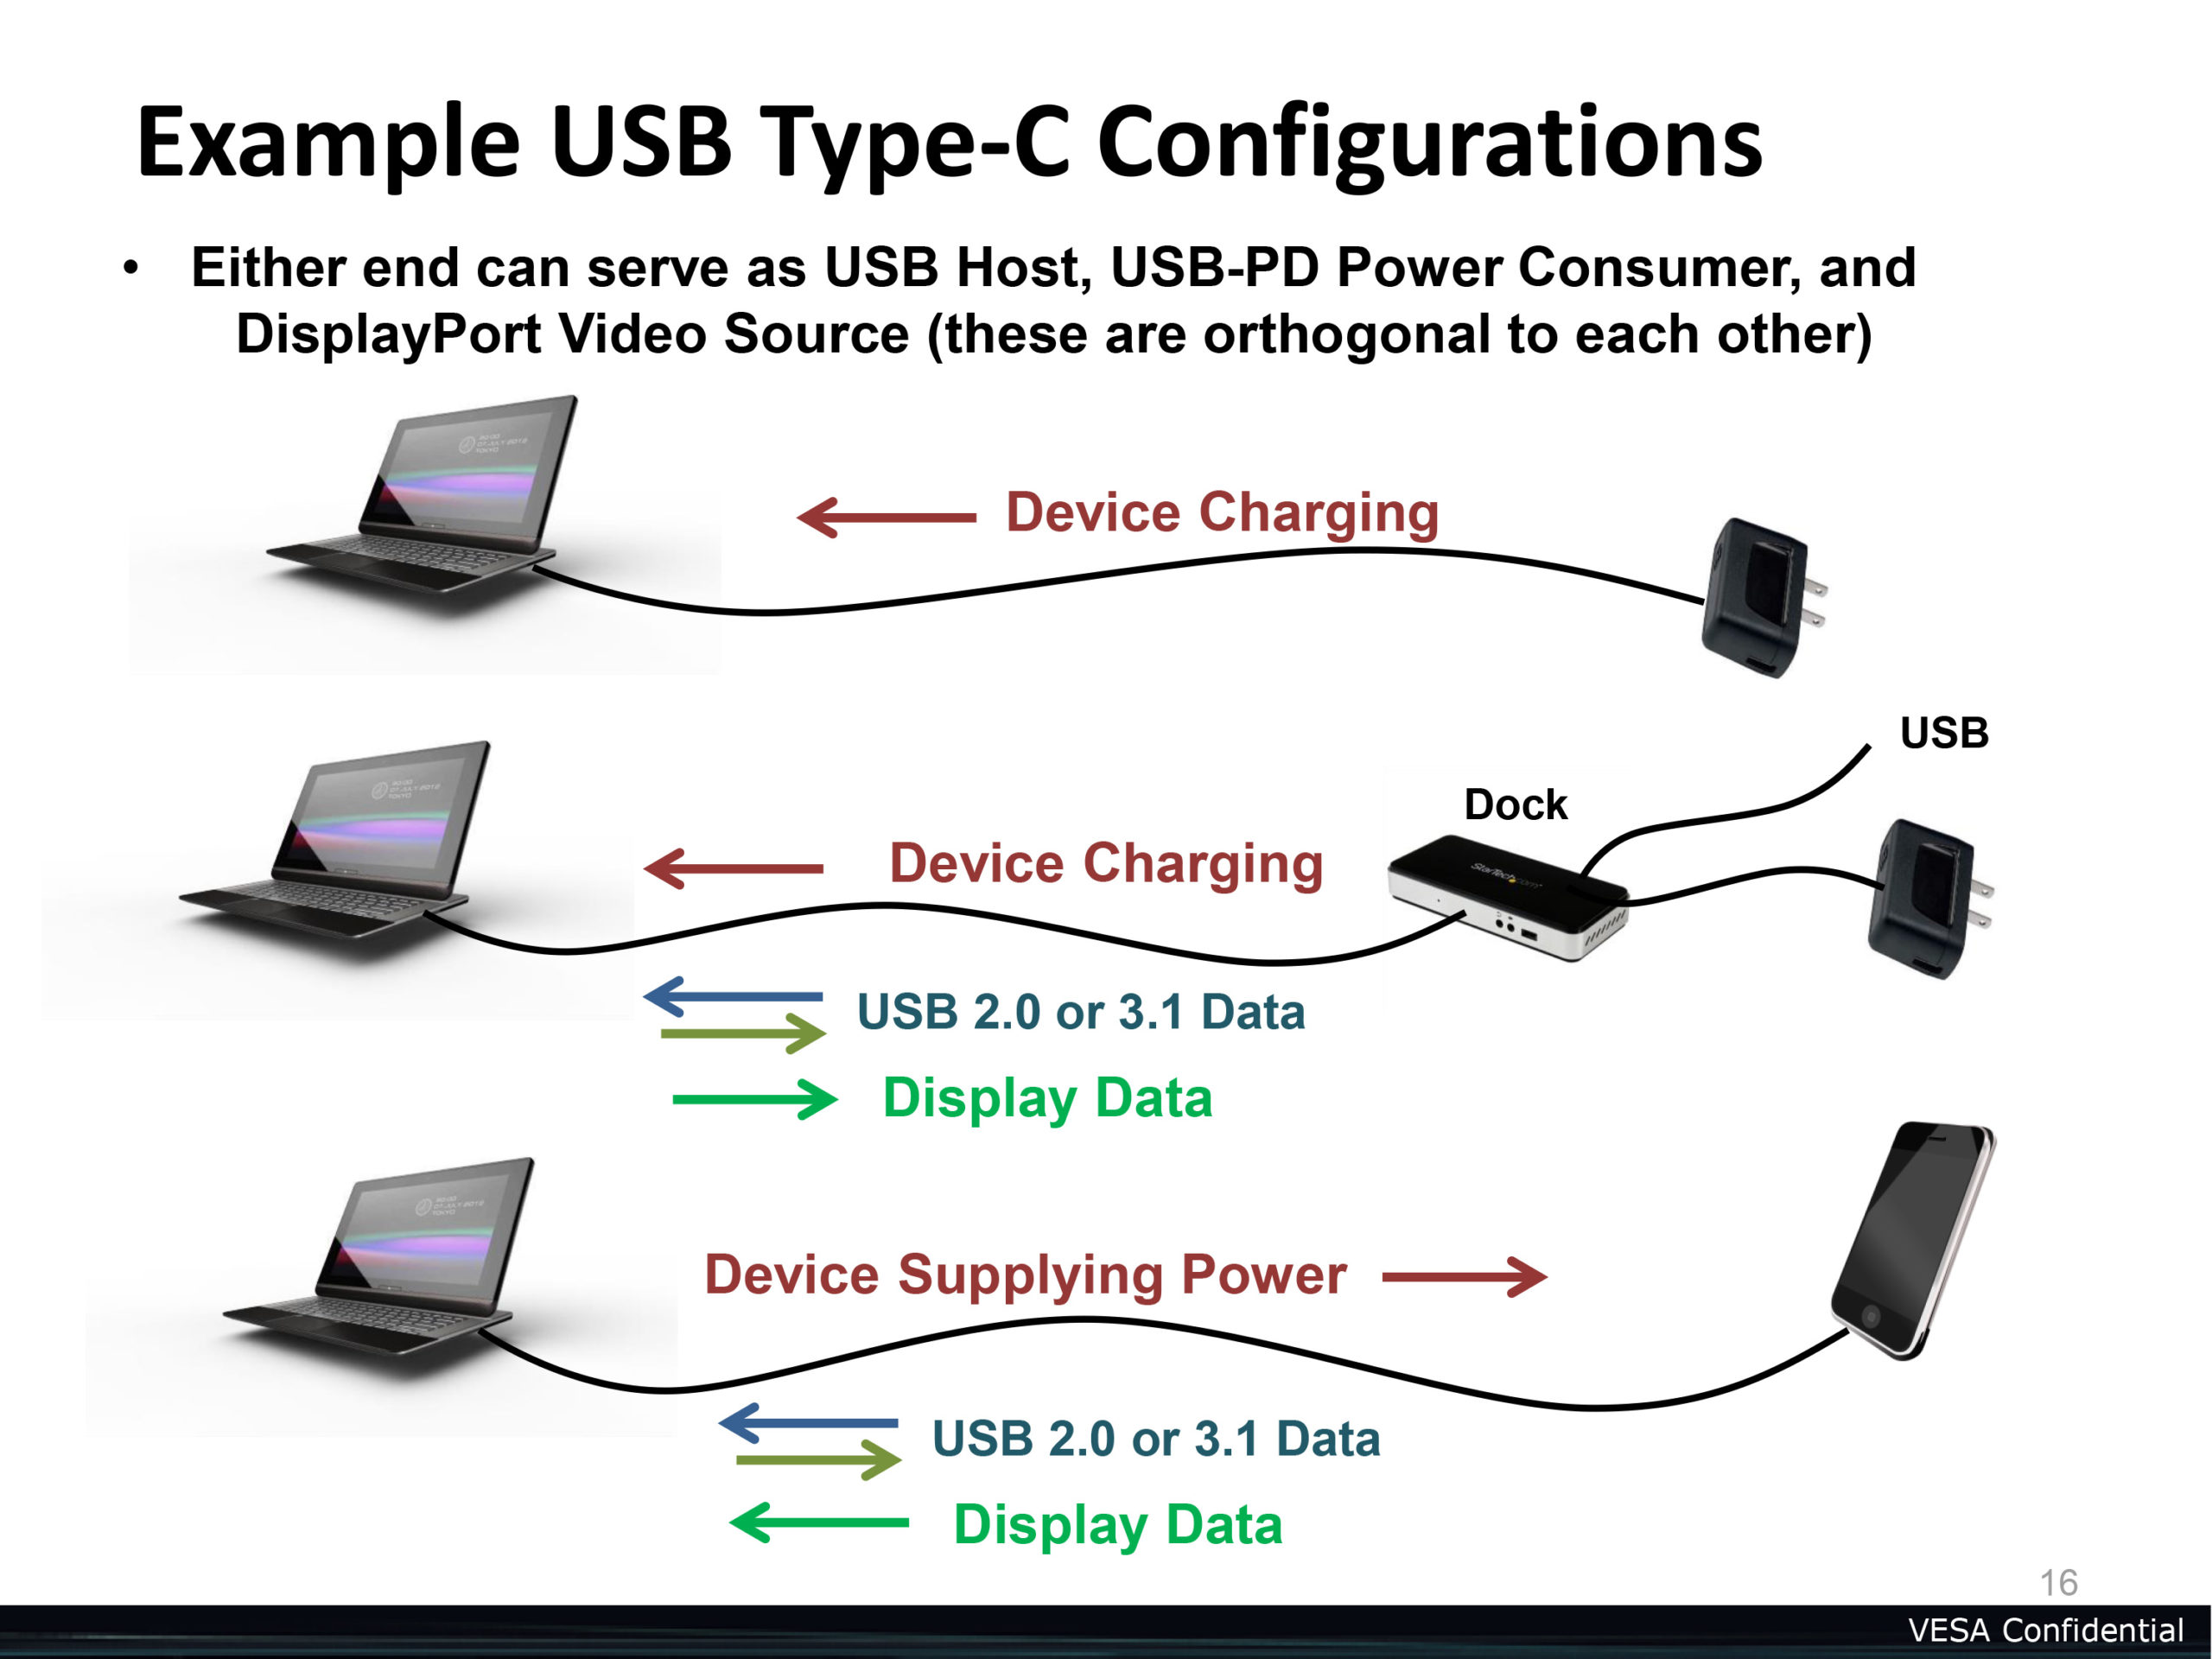 USB Type C: Your Next Laptop Could Have The Holy Grail Of USB Ports